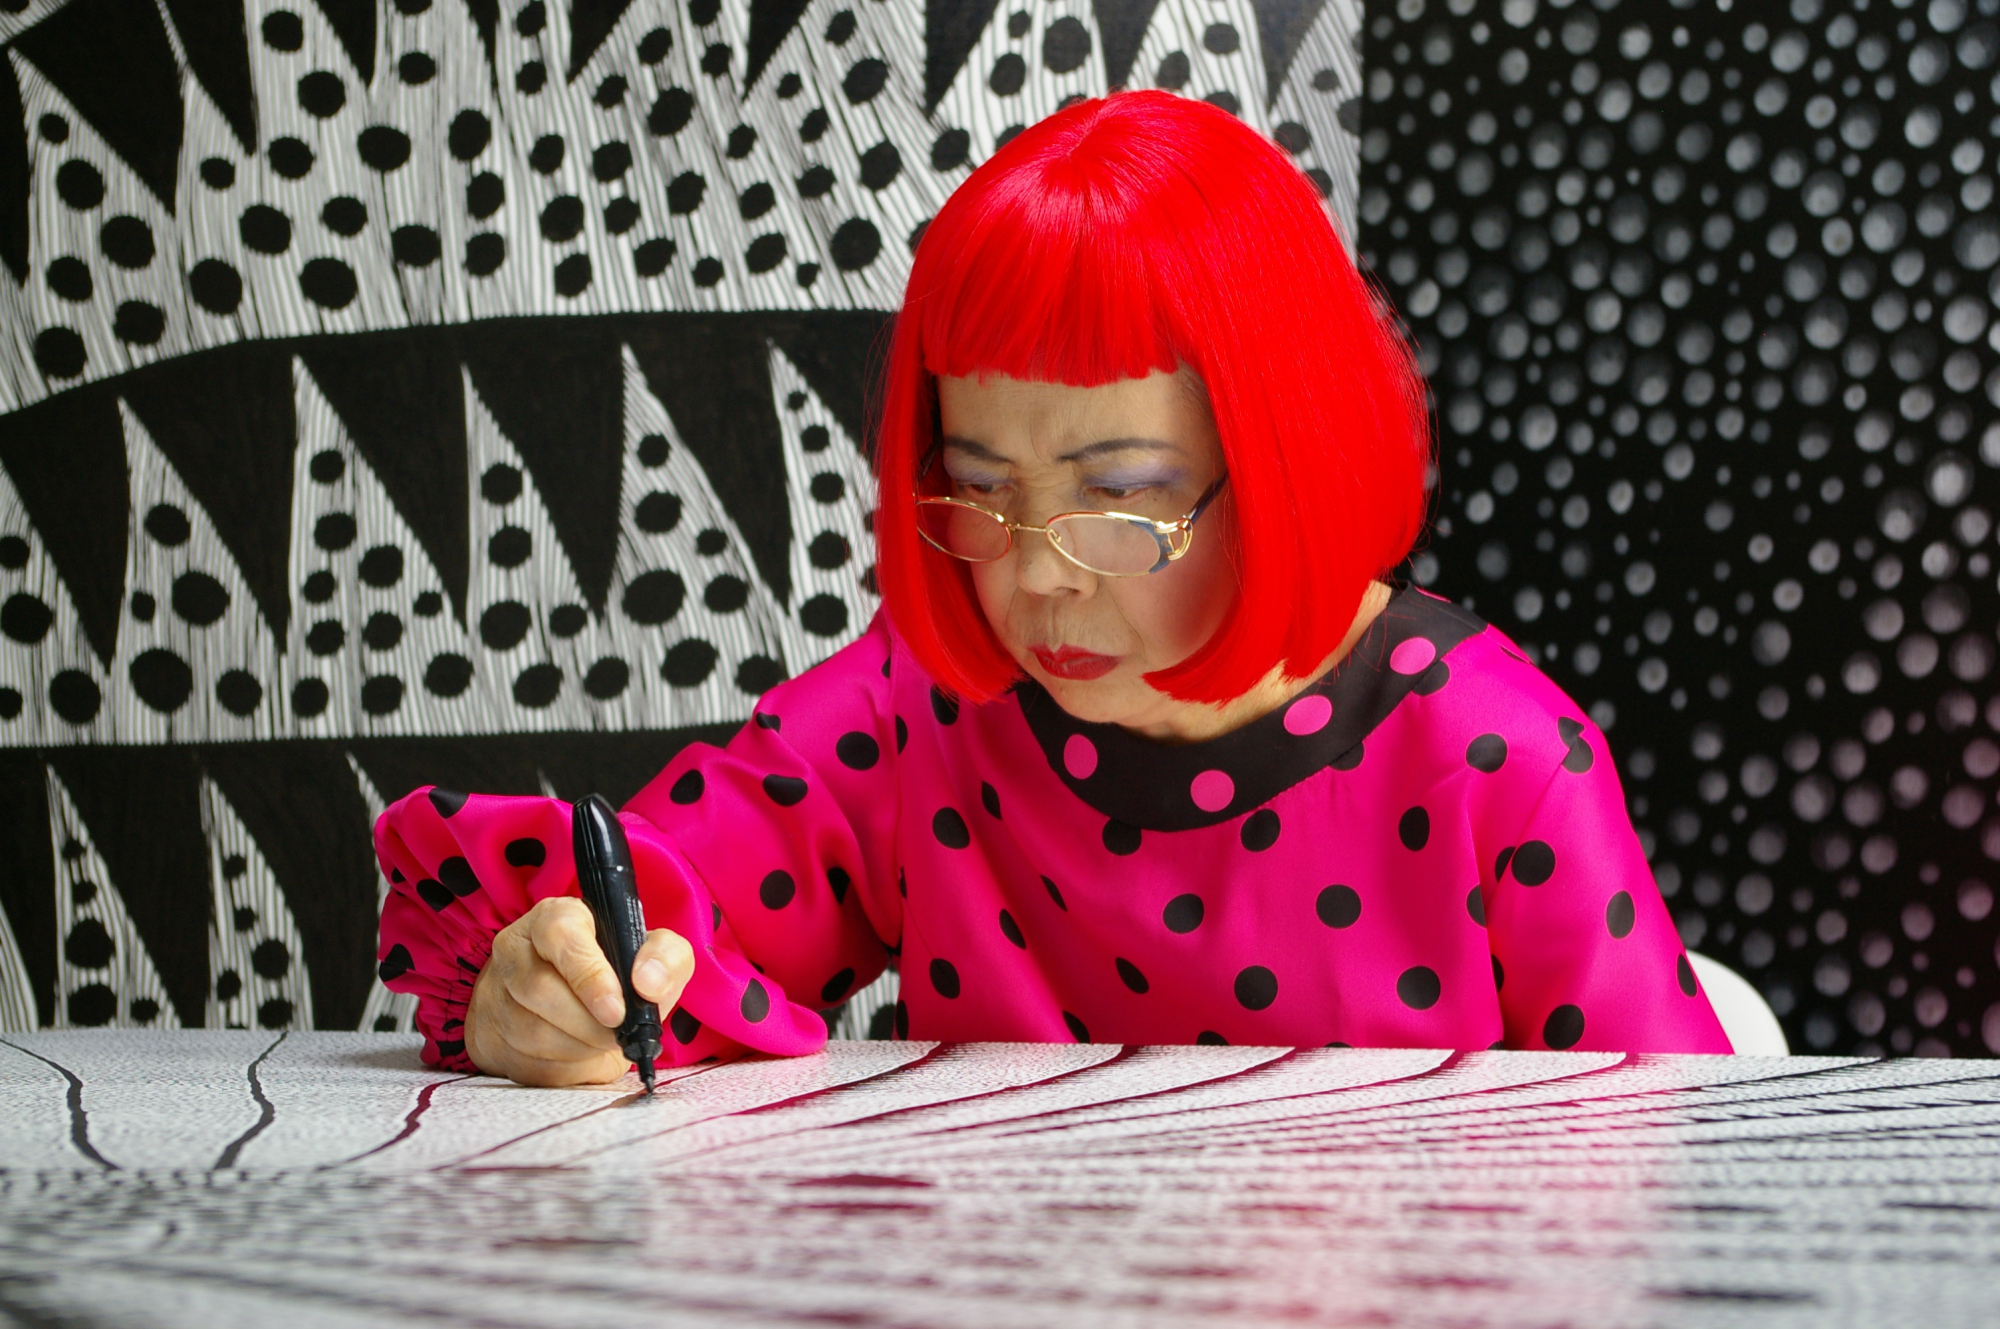 To infinity and beyond: Yayoi Kusama's underdog story, which saw her deal with racism and sexism, inspired Heather Lenz's film. | &#169; TOKYO LEE PRODUCTIONS, INC.